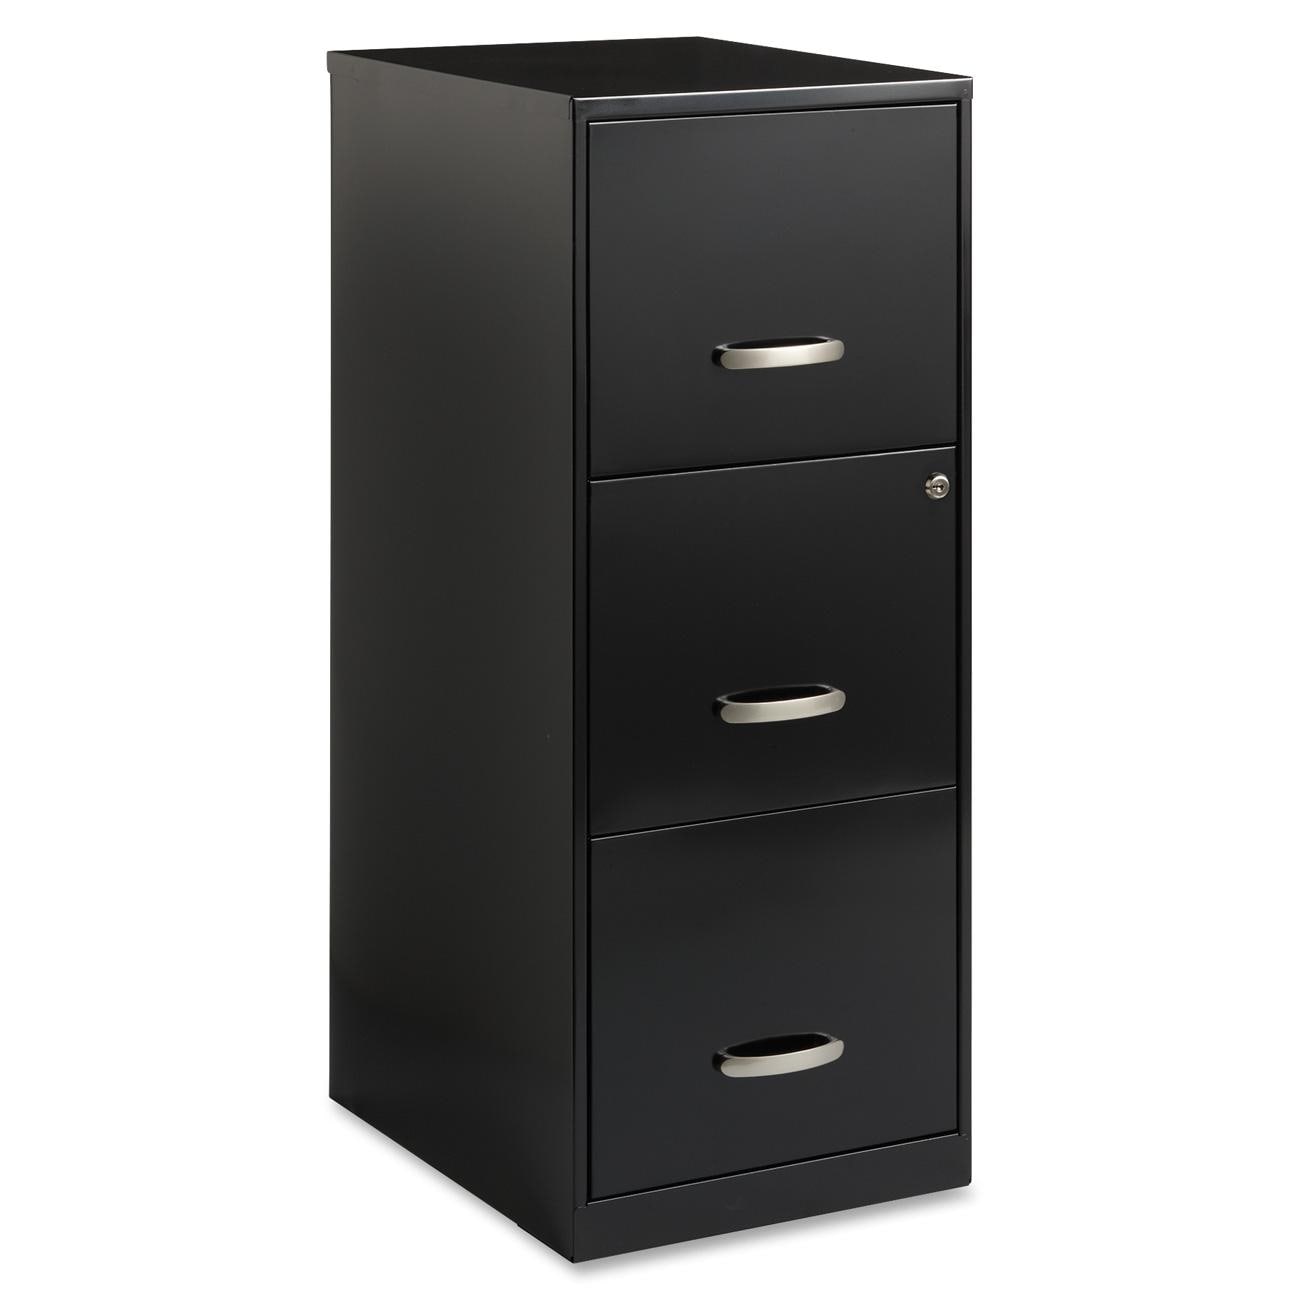 Festnight Metal Drawer Filing Cabinet 3 Drawers Cabinet Detachable Mobile Steel File Storage Cabinets with 4 Casters Dark Gray